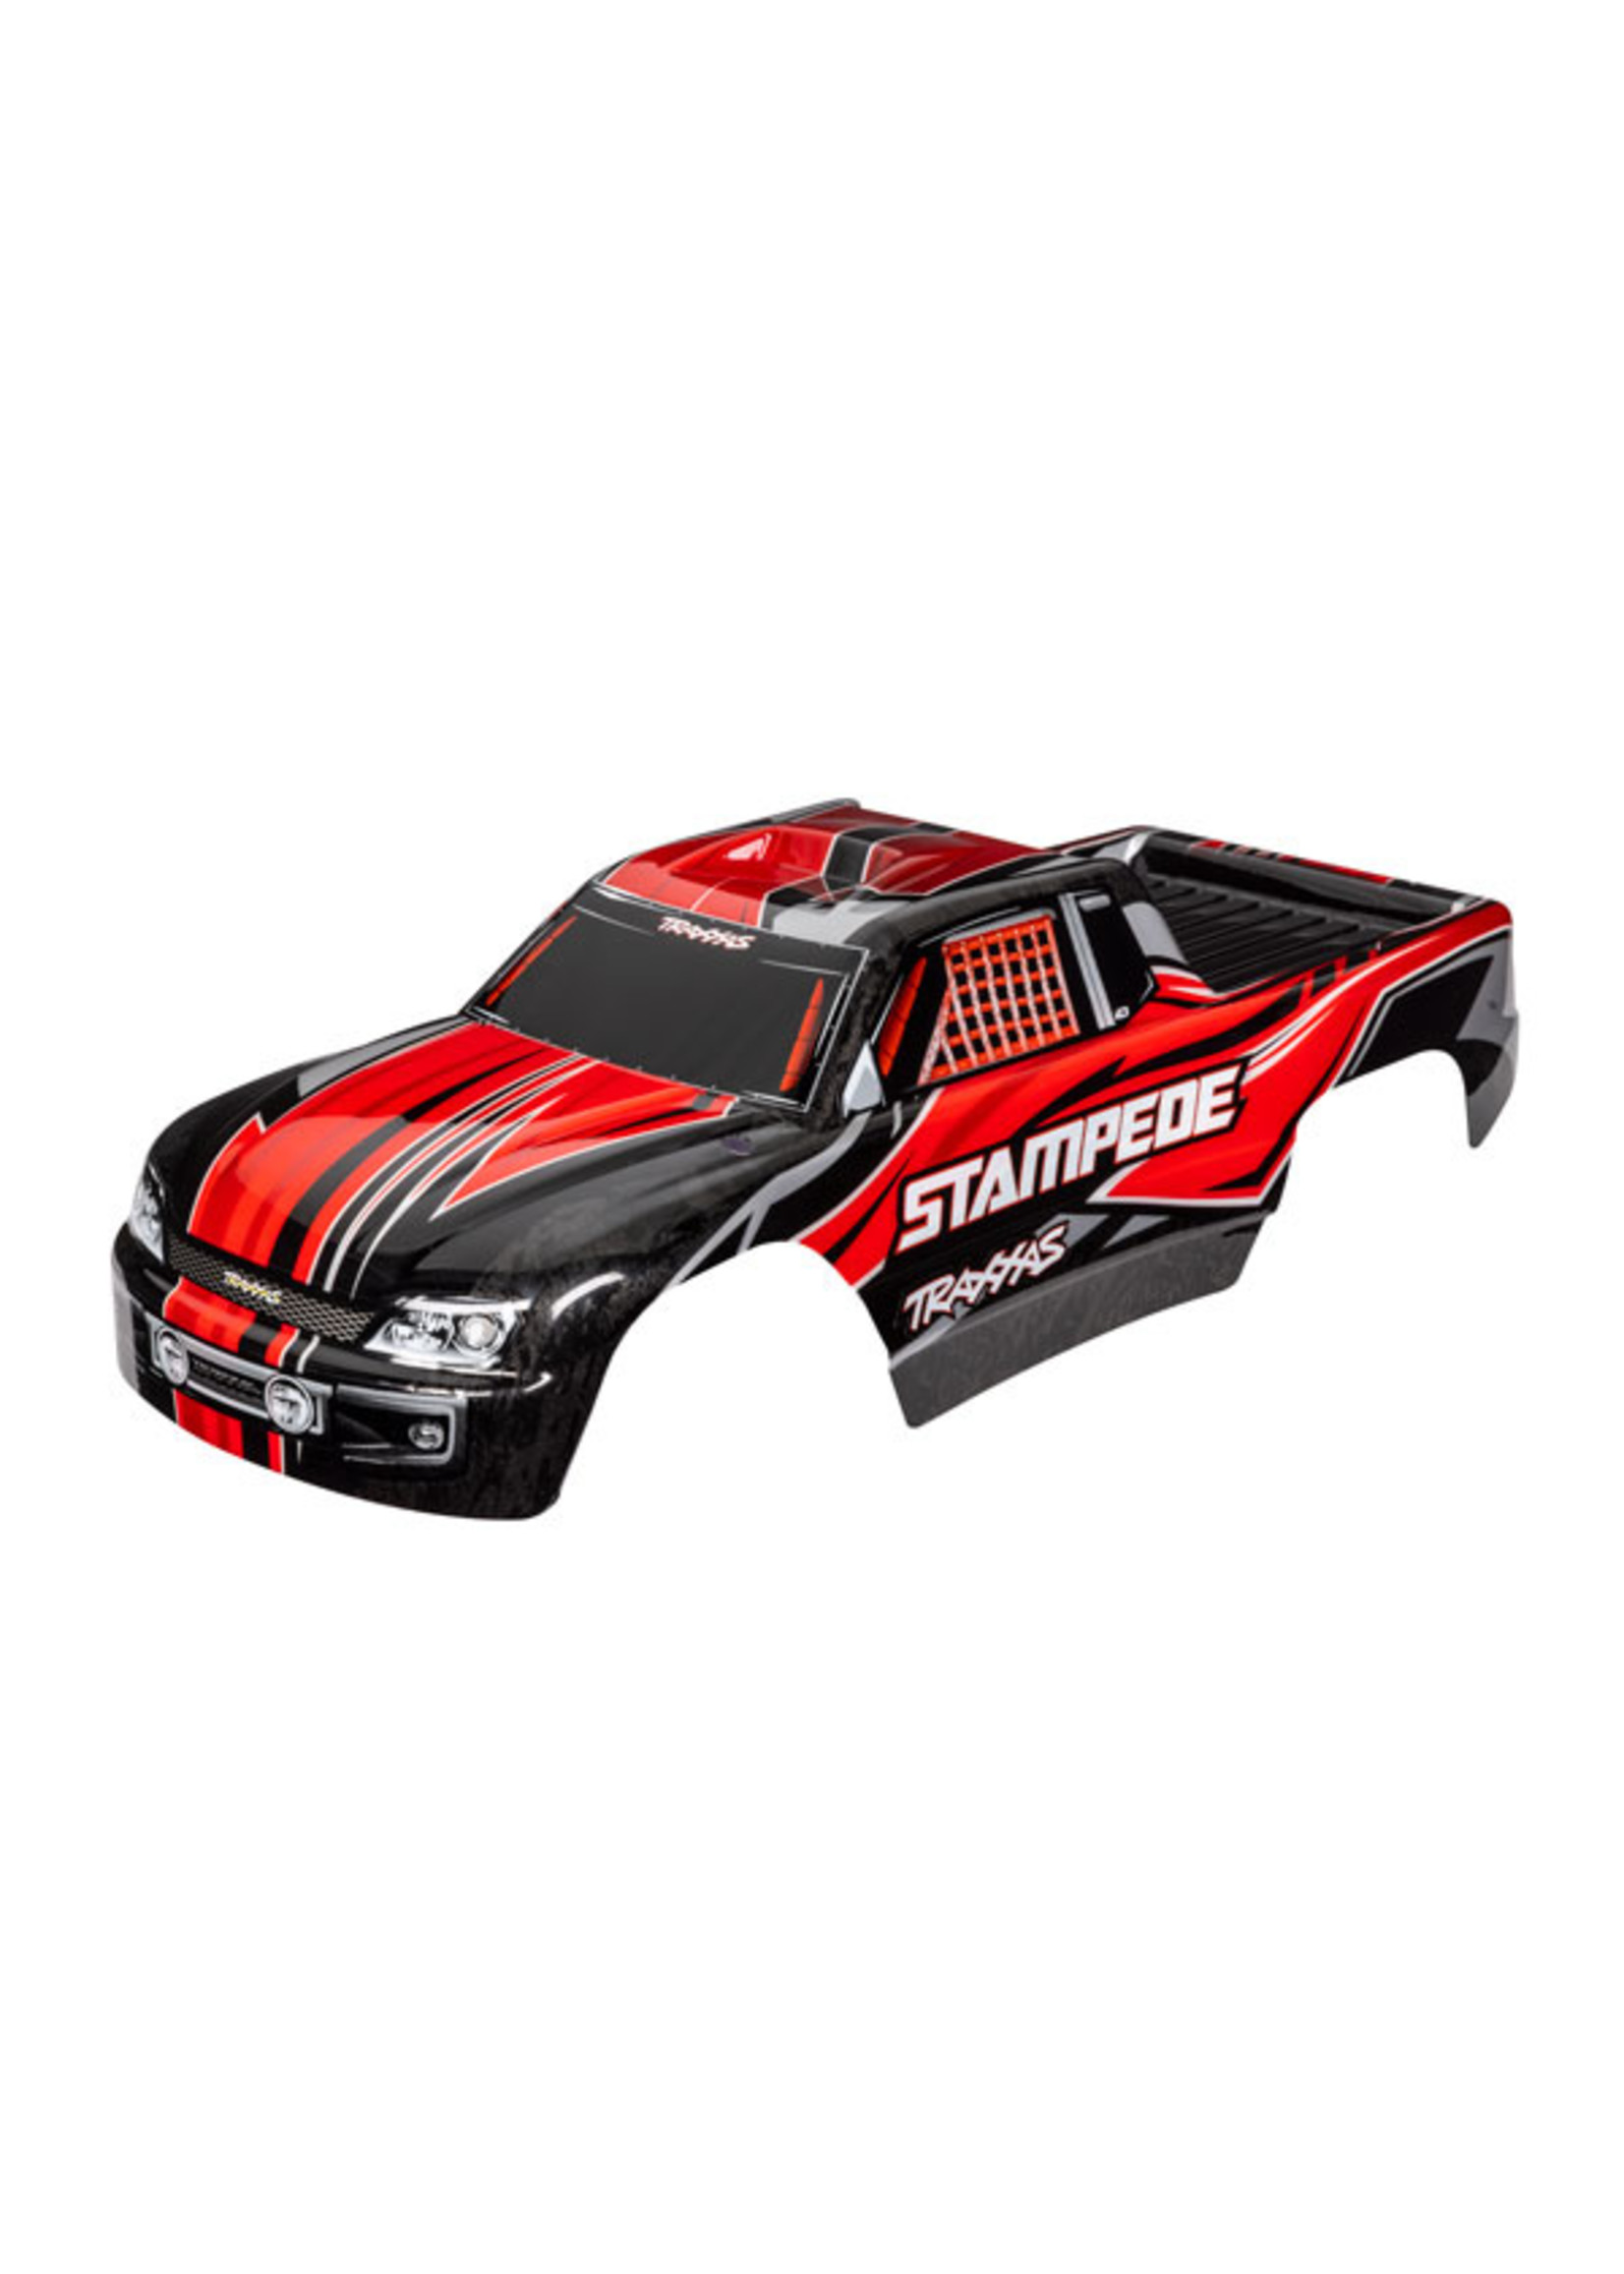 Traxxas 3651 - Stampede Body - Red